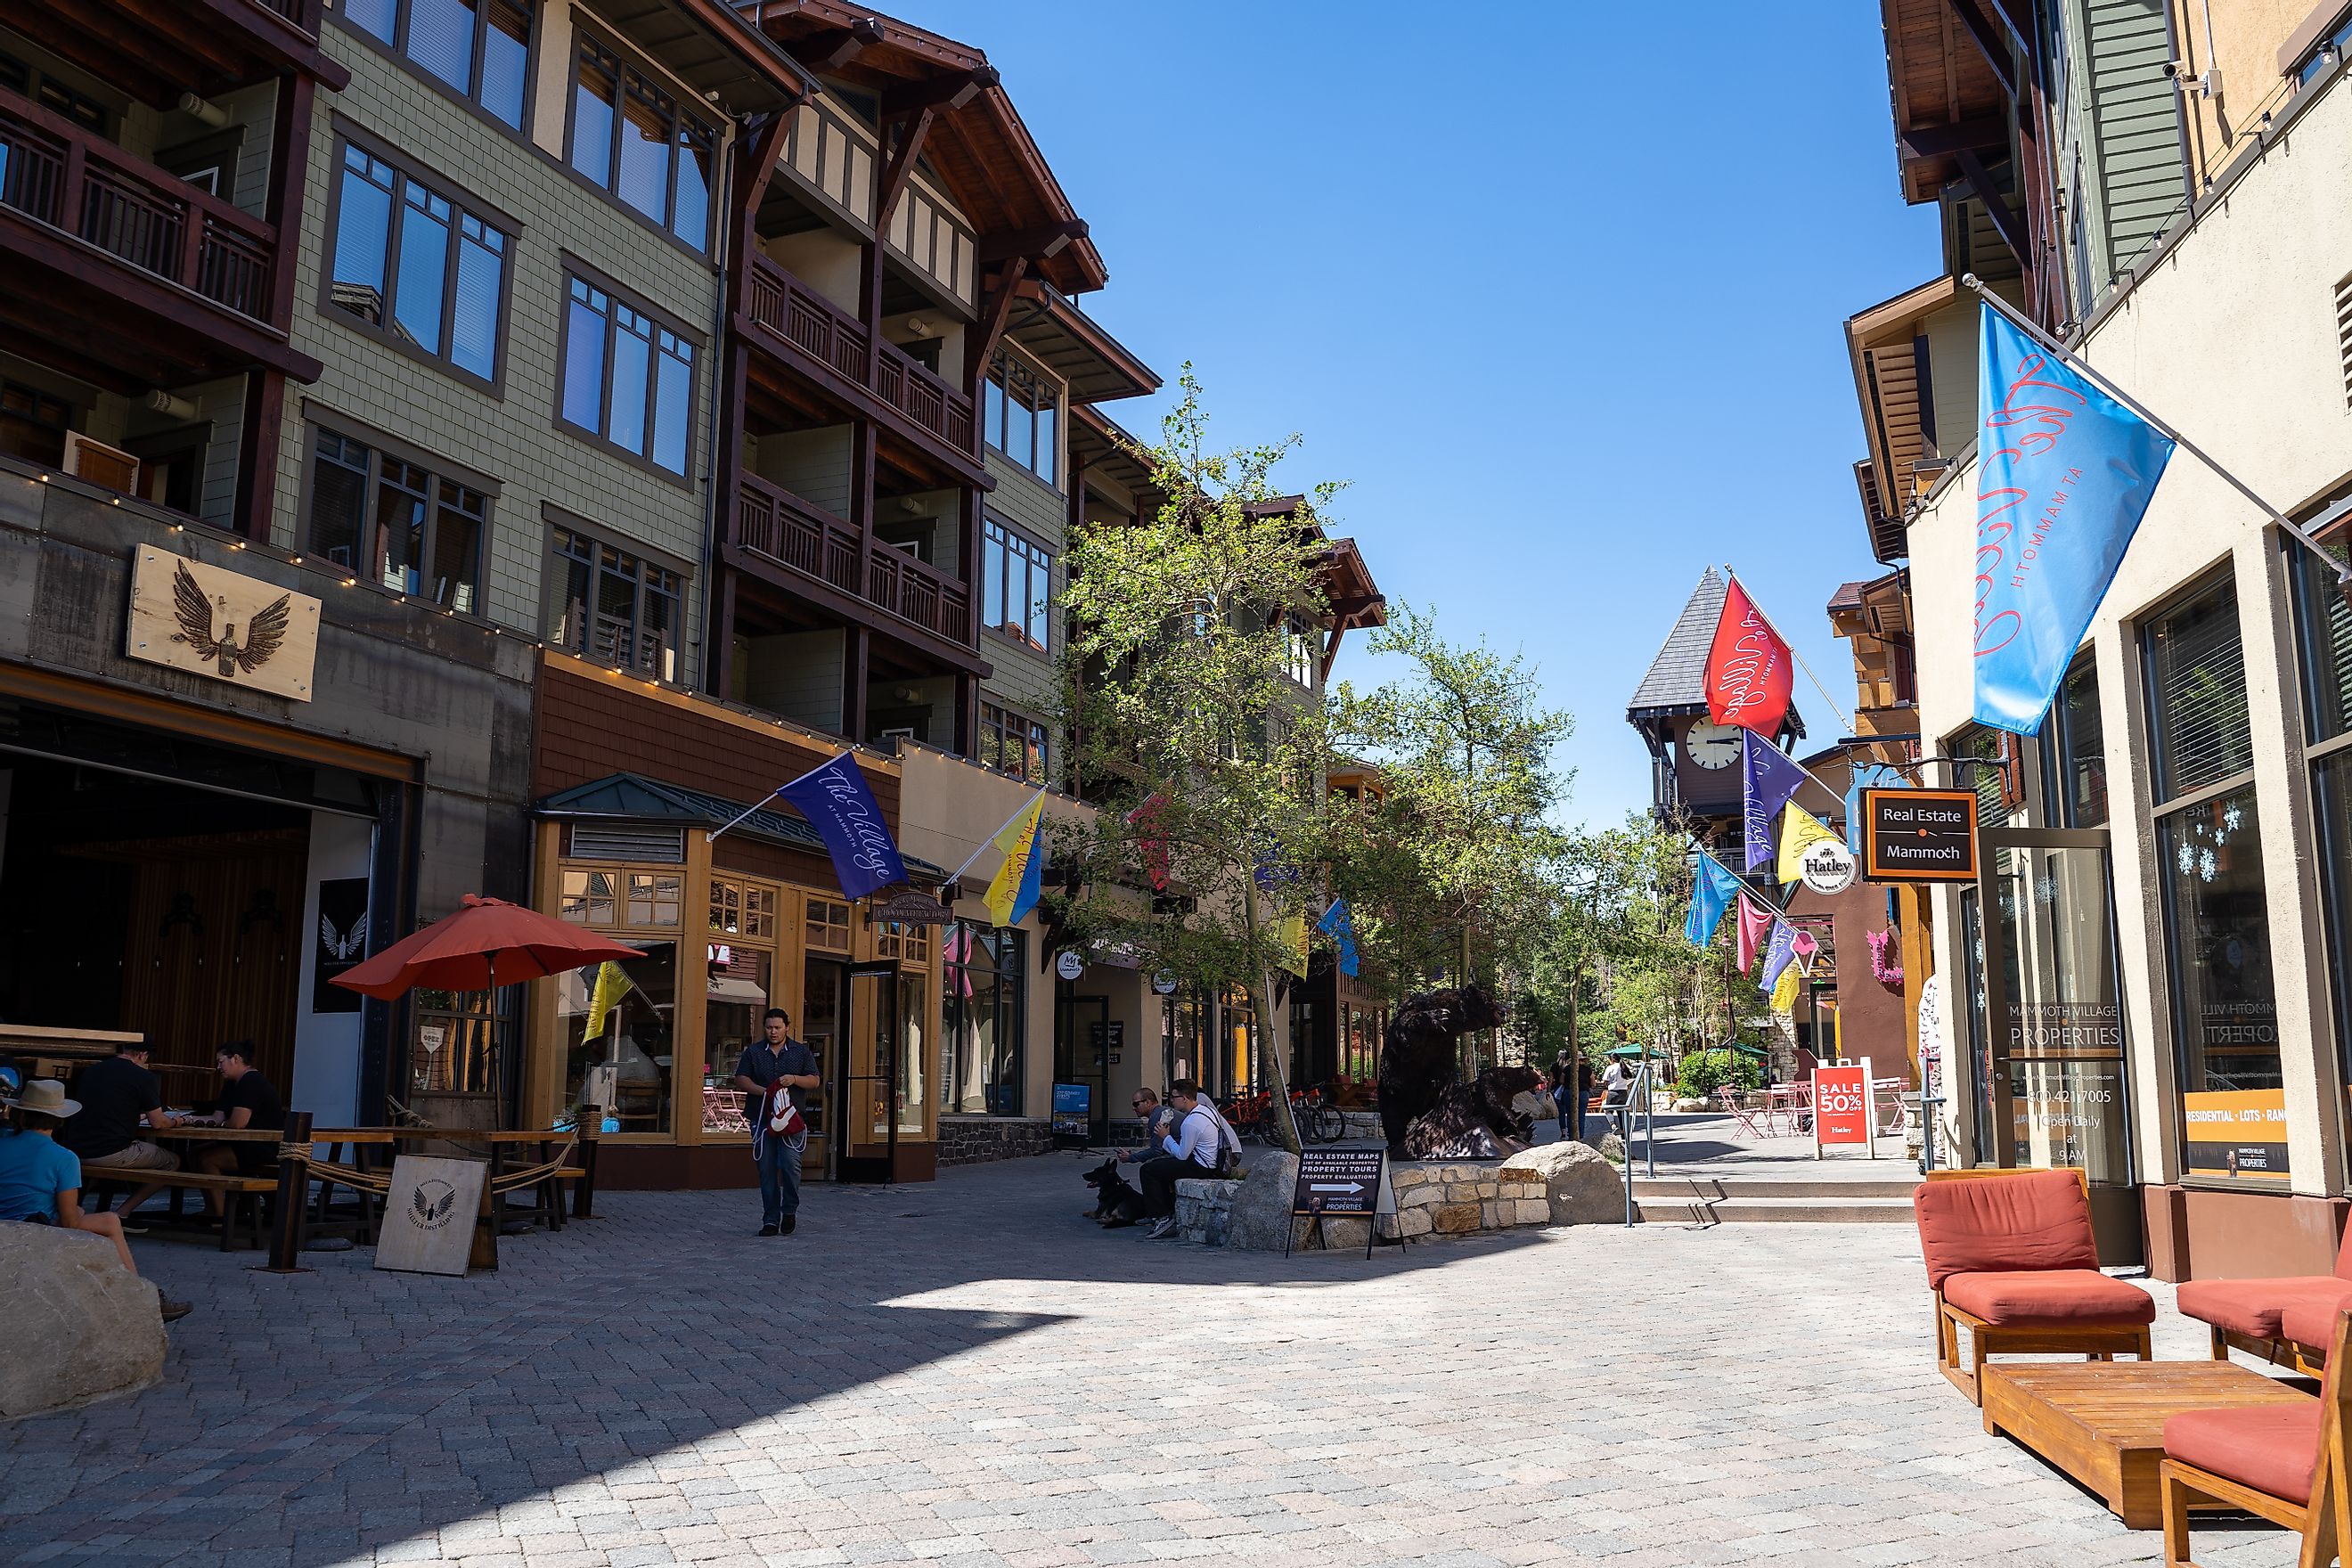 A shopping area in Mammoth Lakes, California. Editorial credit: melissamn / Shutterstock.com